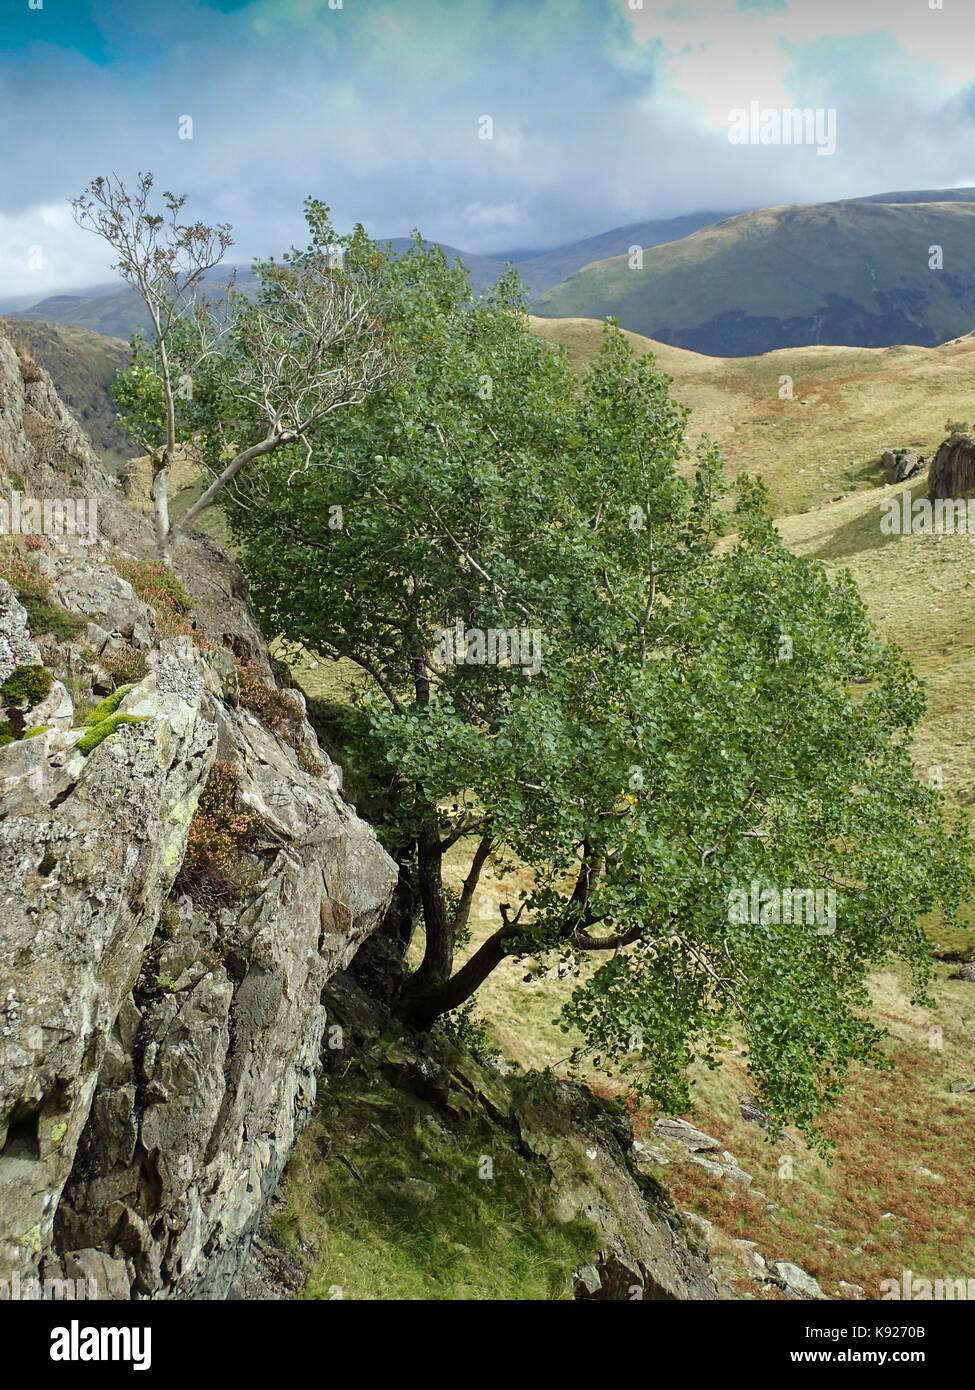 Aspen, Populus tremula, growing on a crag in the Eastern Fells area of the Lake District National Park, Cumbria, England Stock Photo